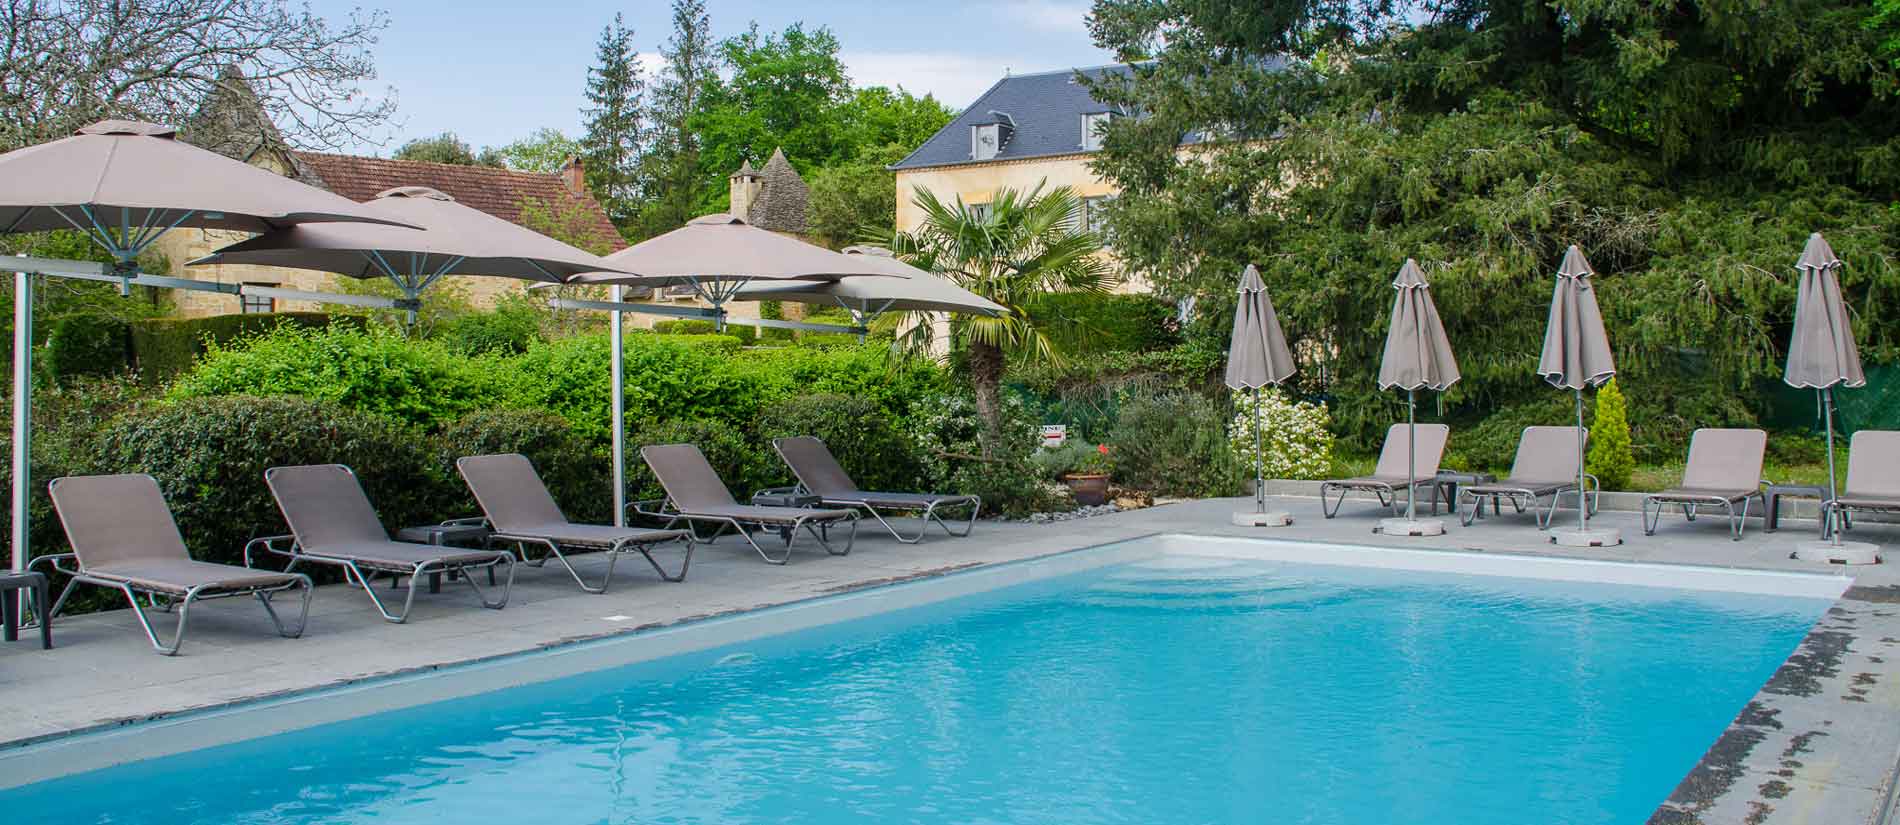 Gites with swimming pool in Périgord